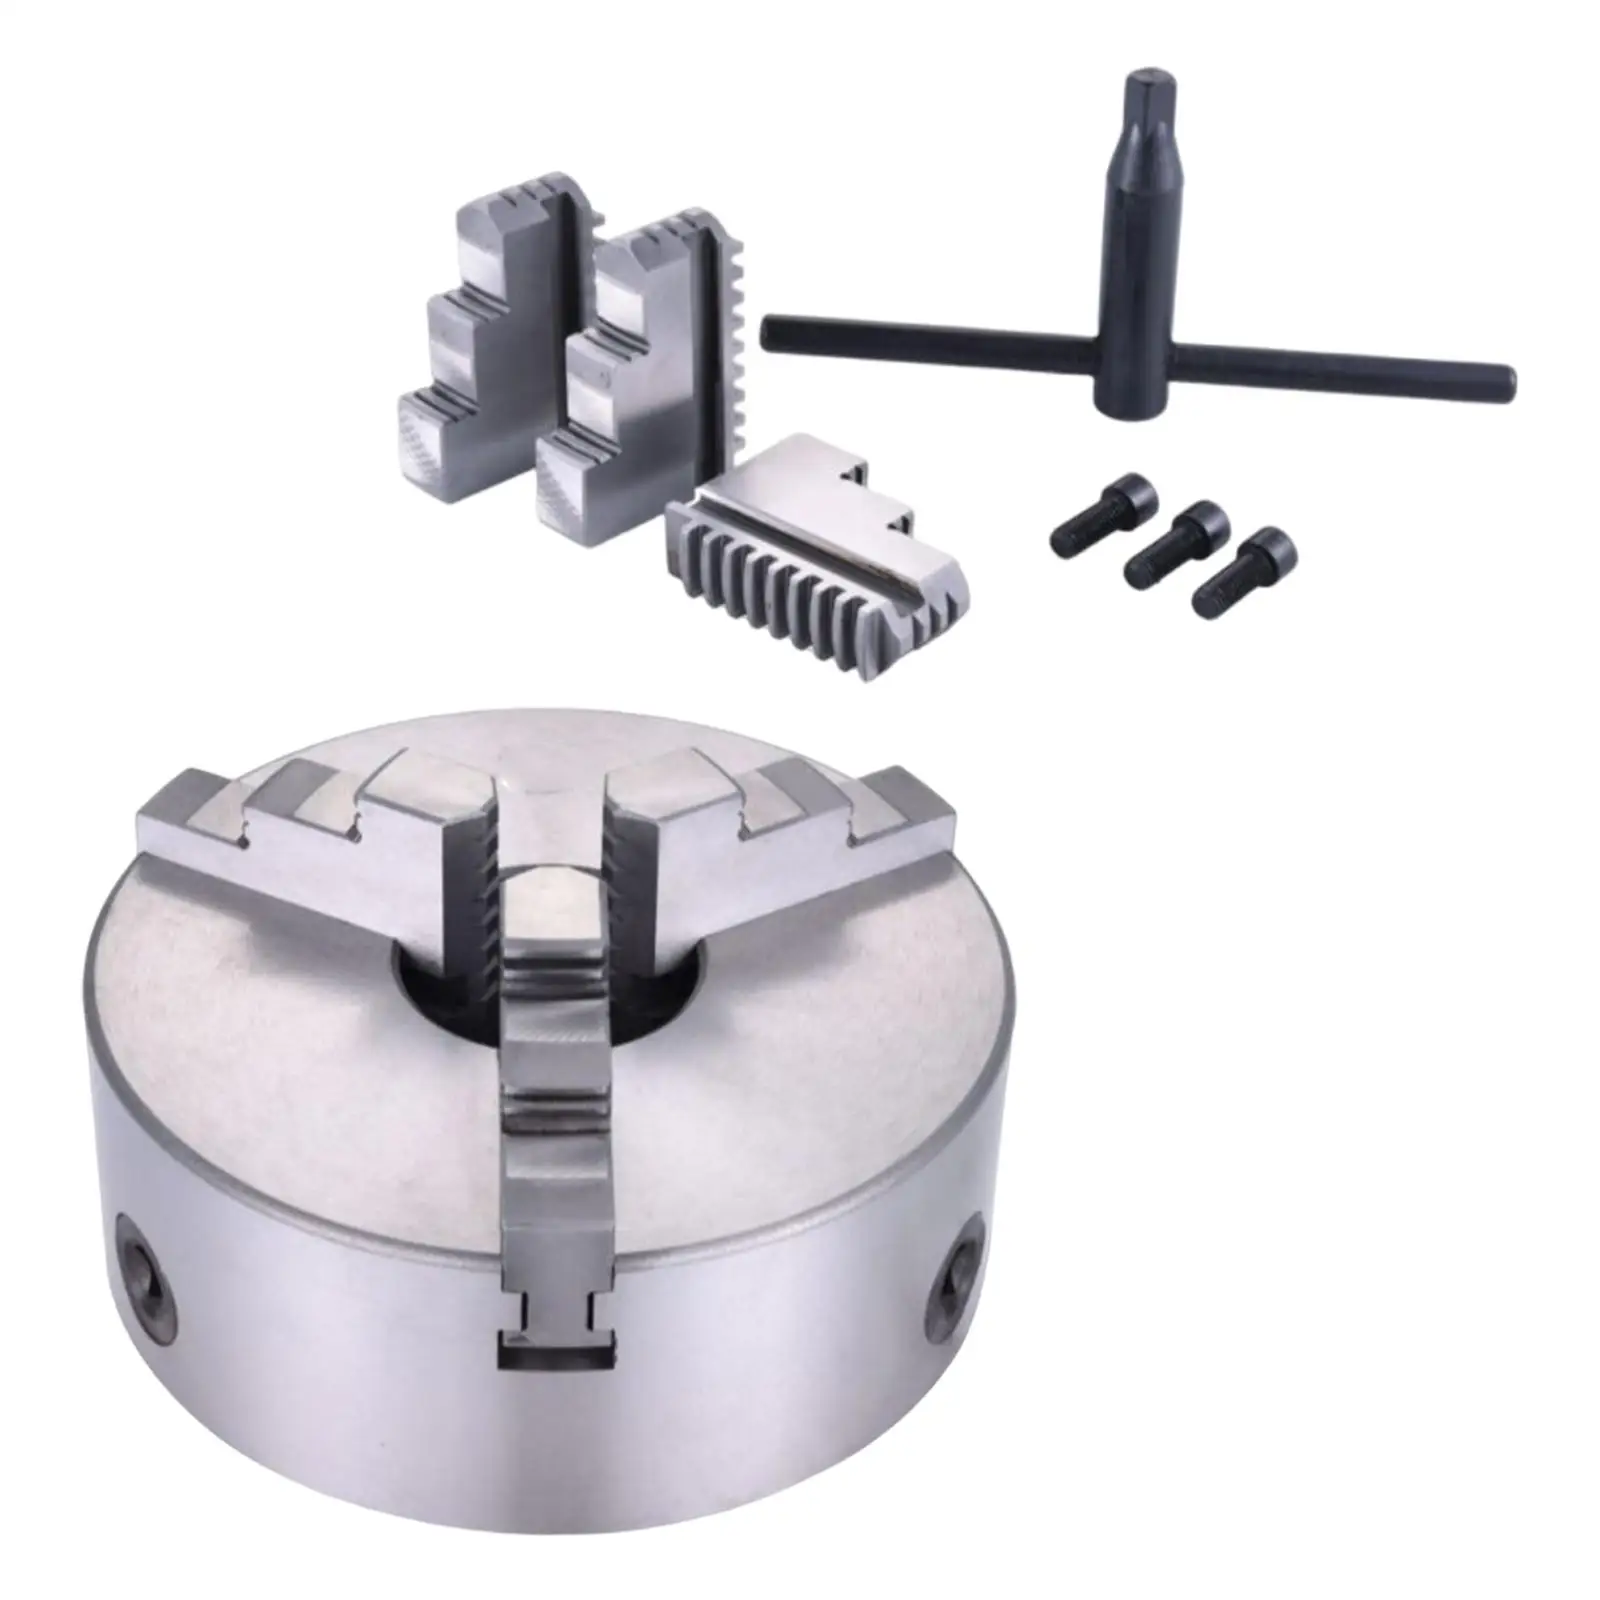 4 Inch/ 100 Mm Lathe Chuck 3 Jaw , Fast Clamping  High Adaptability